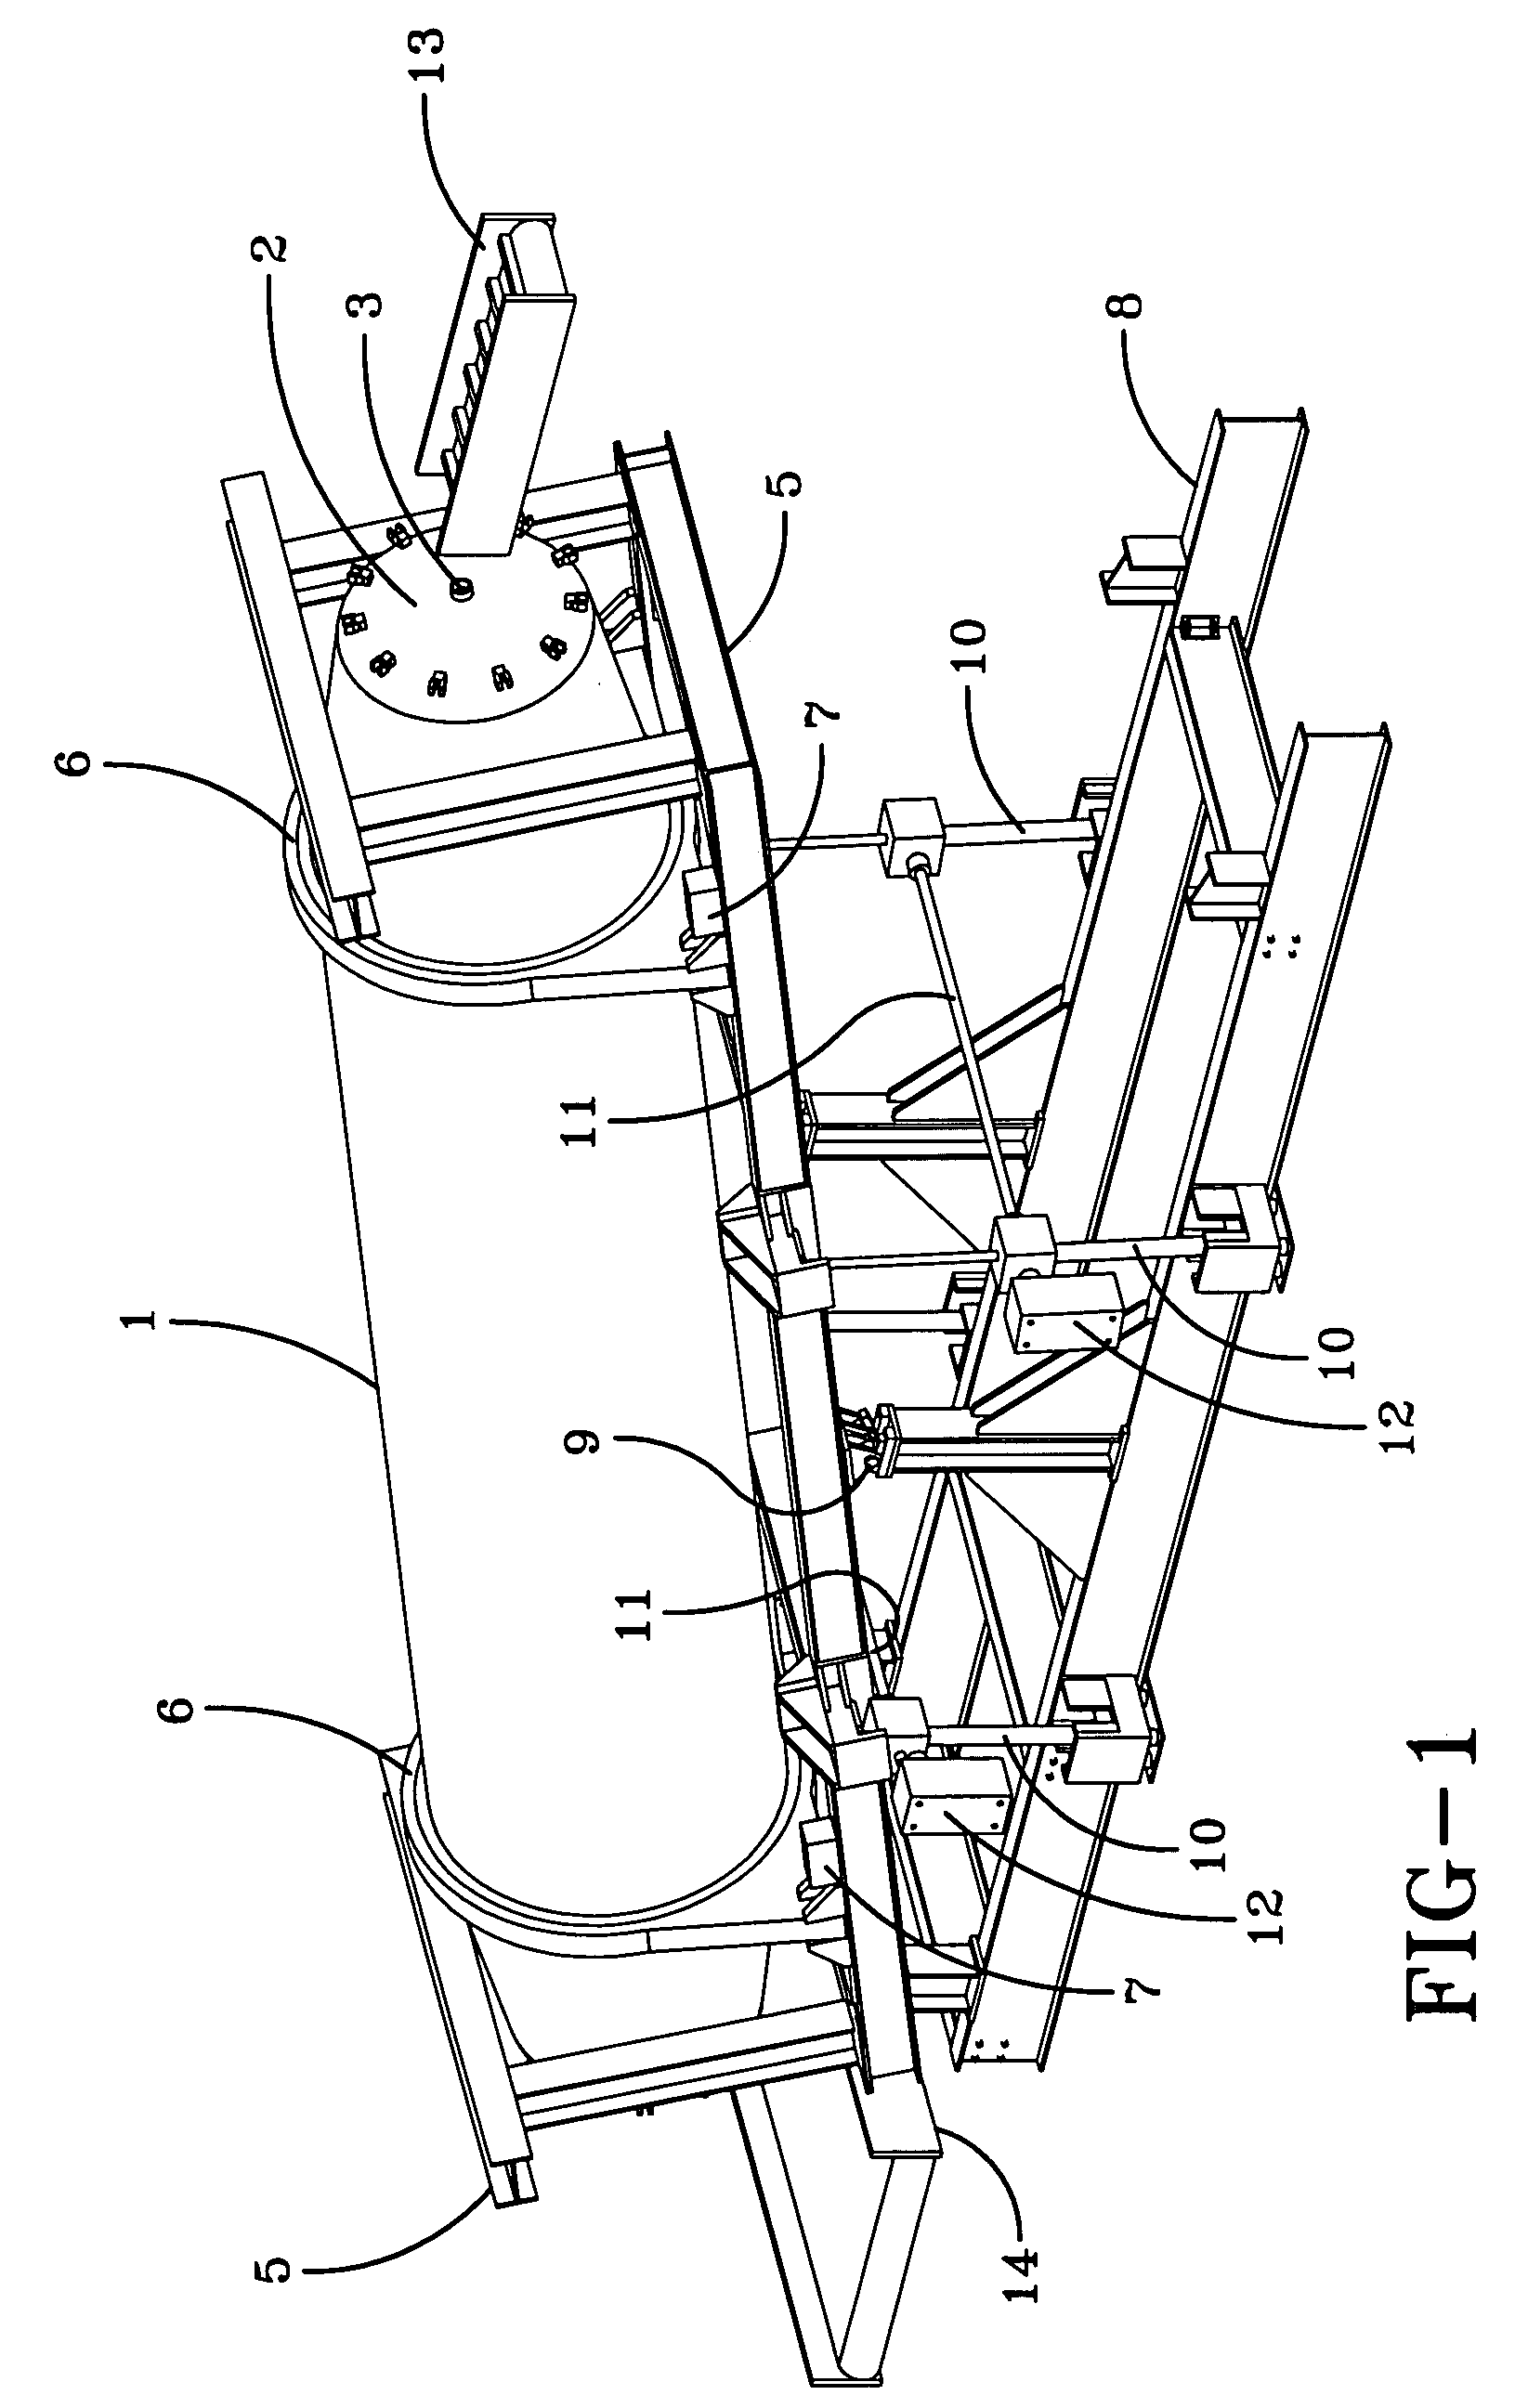 Waste processing apparatus and method featuring water removal